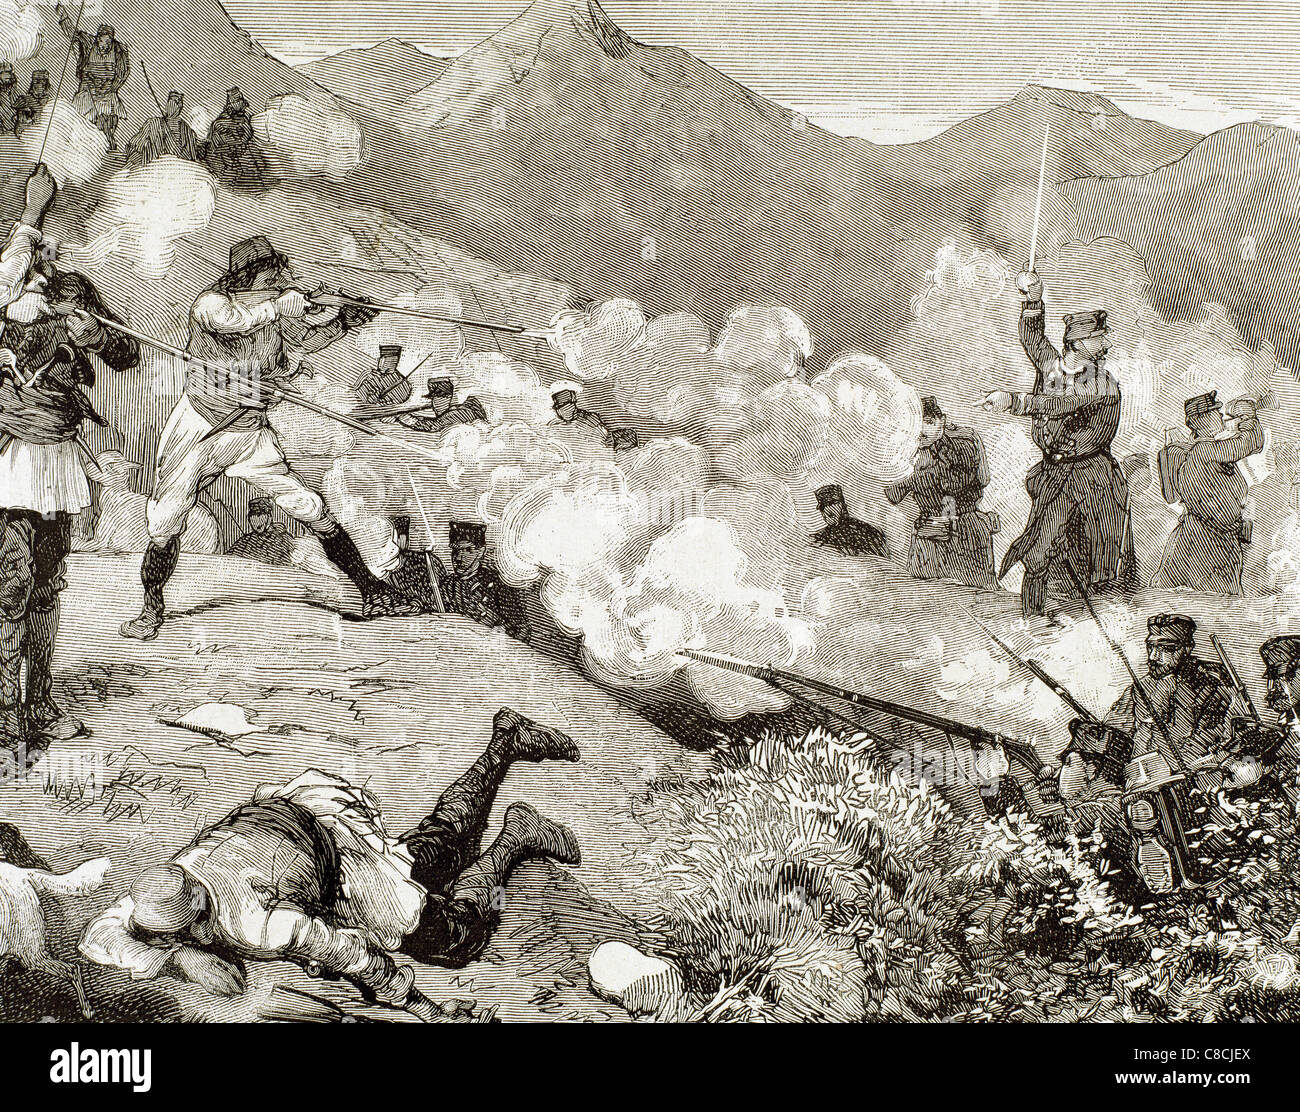 Dalmata-Herzegovina war. Fighting in the mountains of Zagoria, between the insurgents and austrian troops (1882). Engraving. Stock Photo